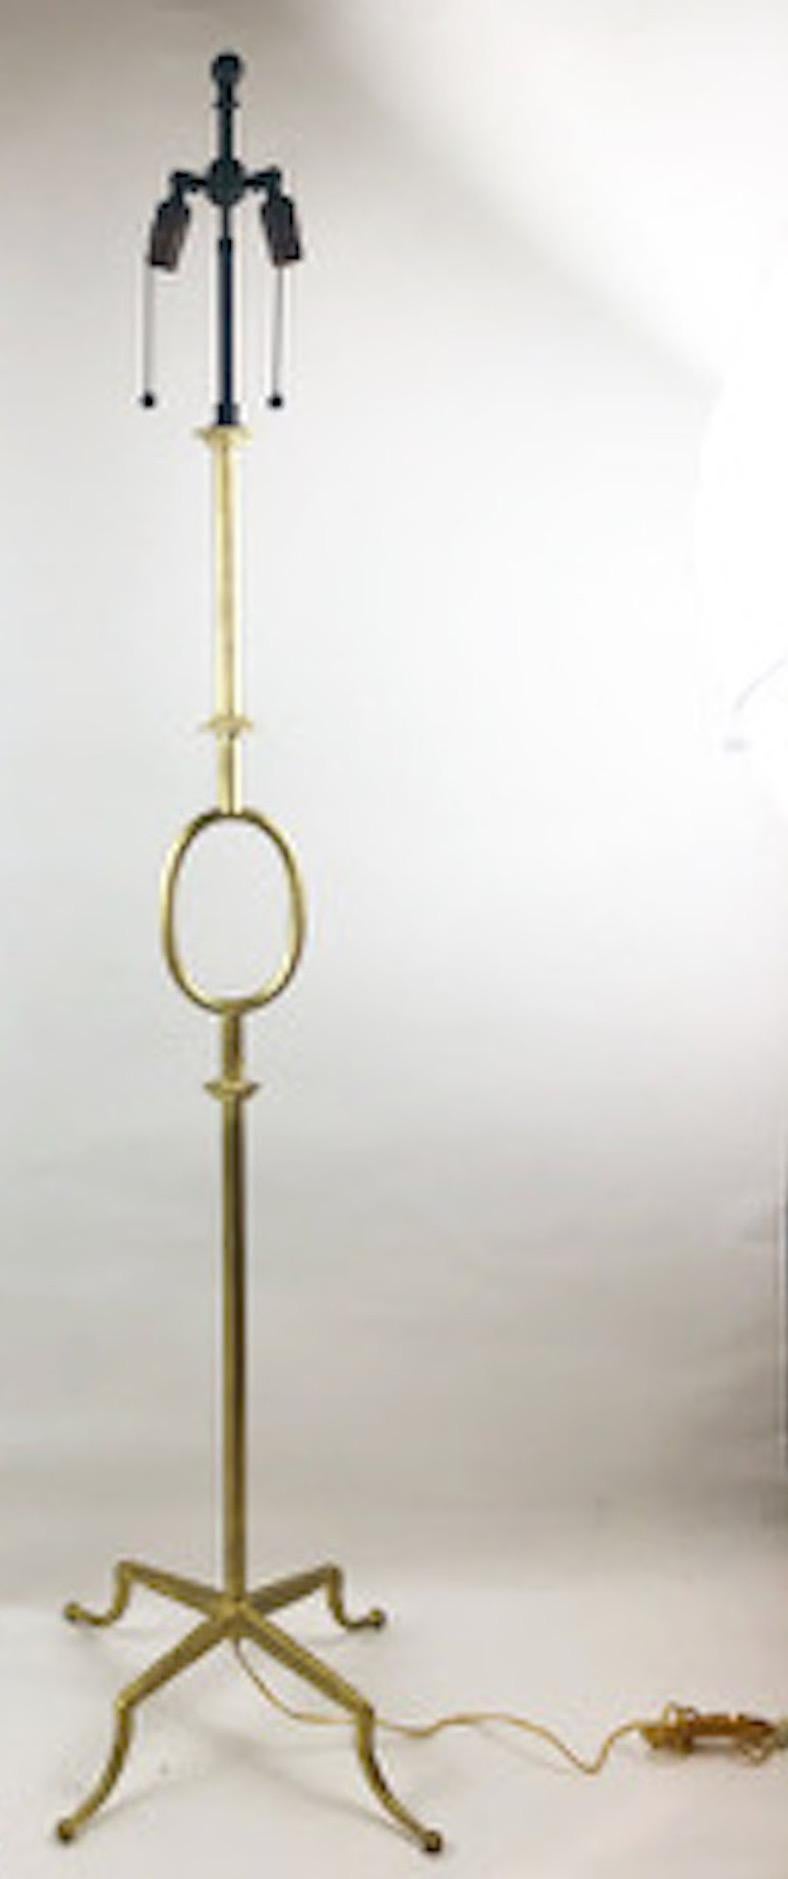 French Vintage Poillerat Mattaliano Pair Gilt Iron Floor Lamp with Provenance For Sale